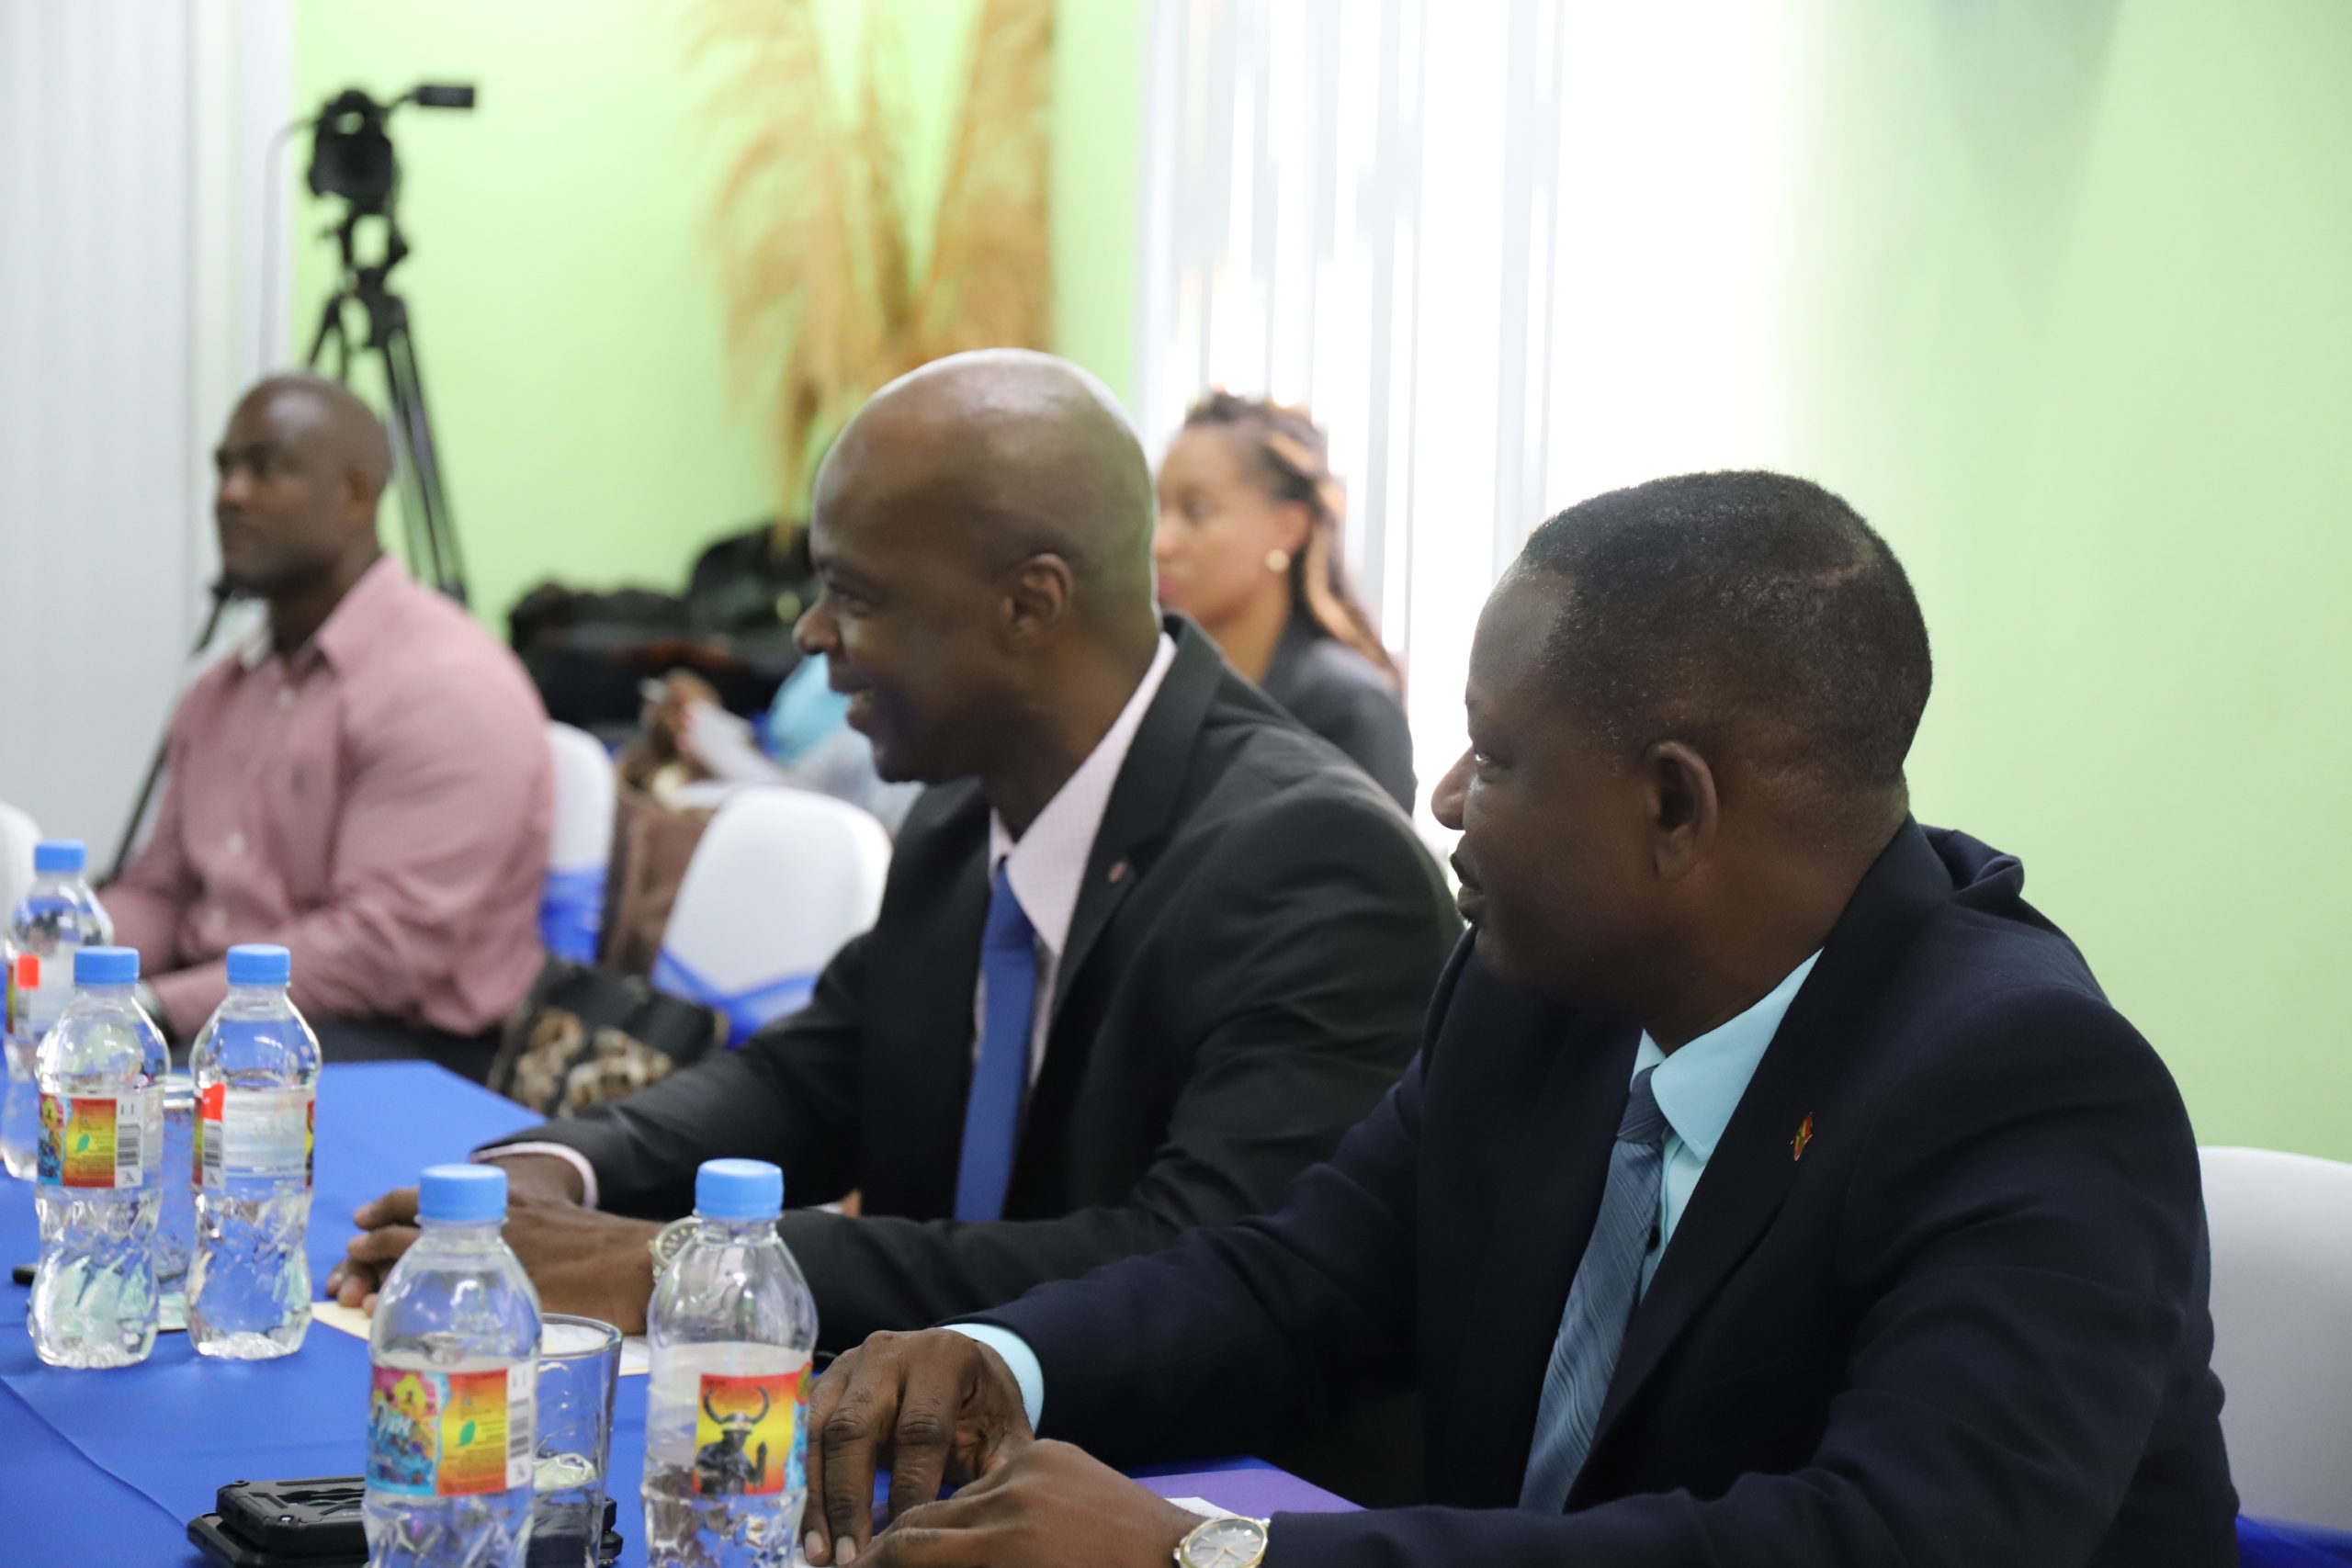 56th Annual General Meeting(AGM) of the Grenada Co-operative League Ltd (Aug. 2022)